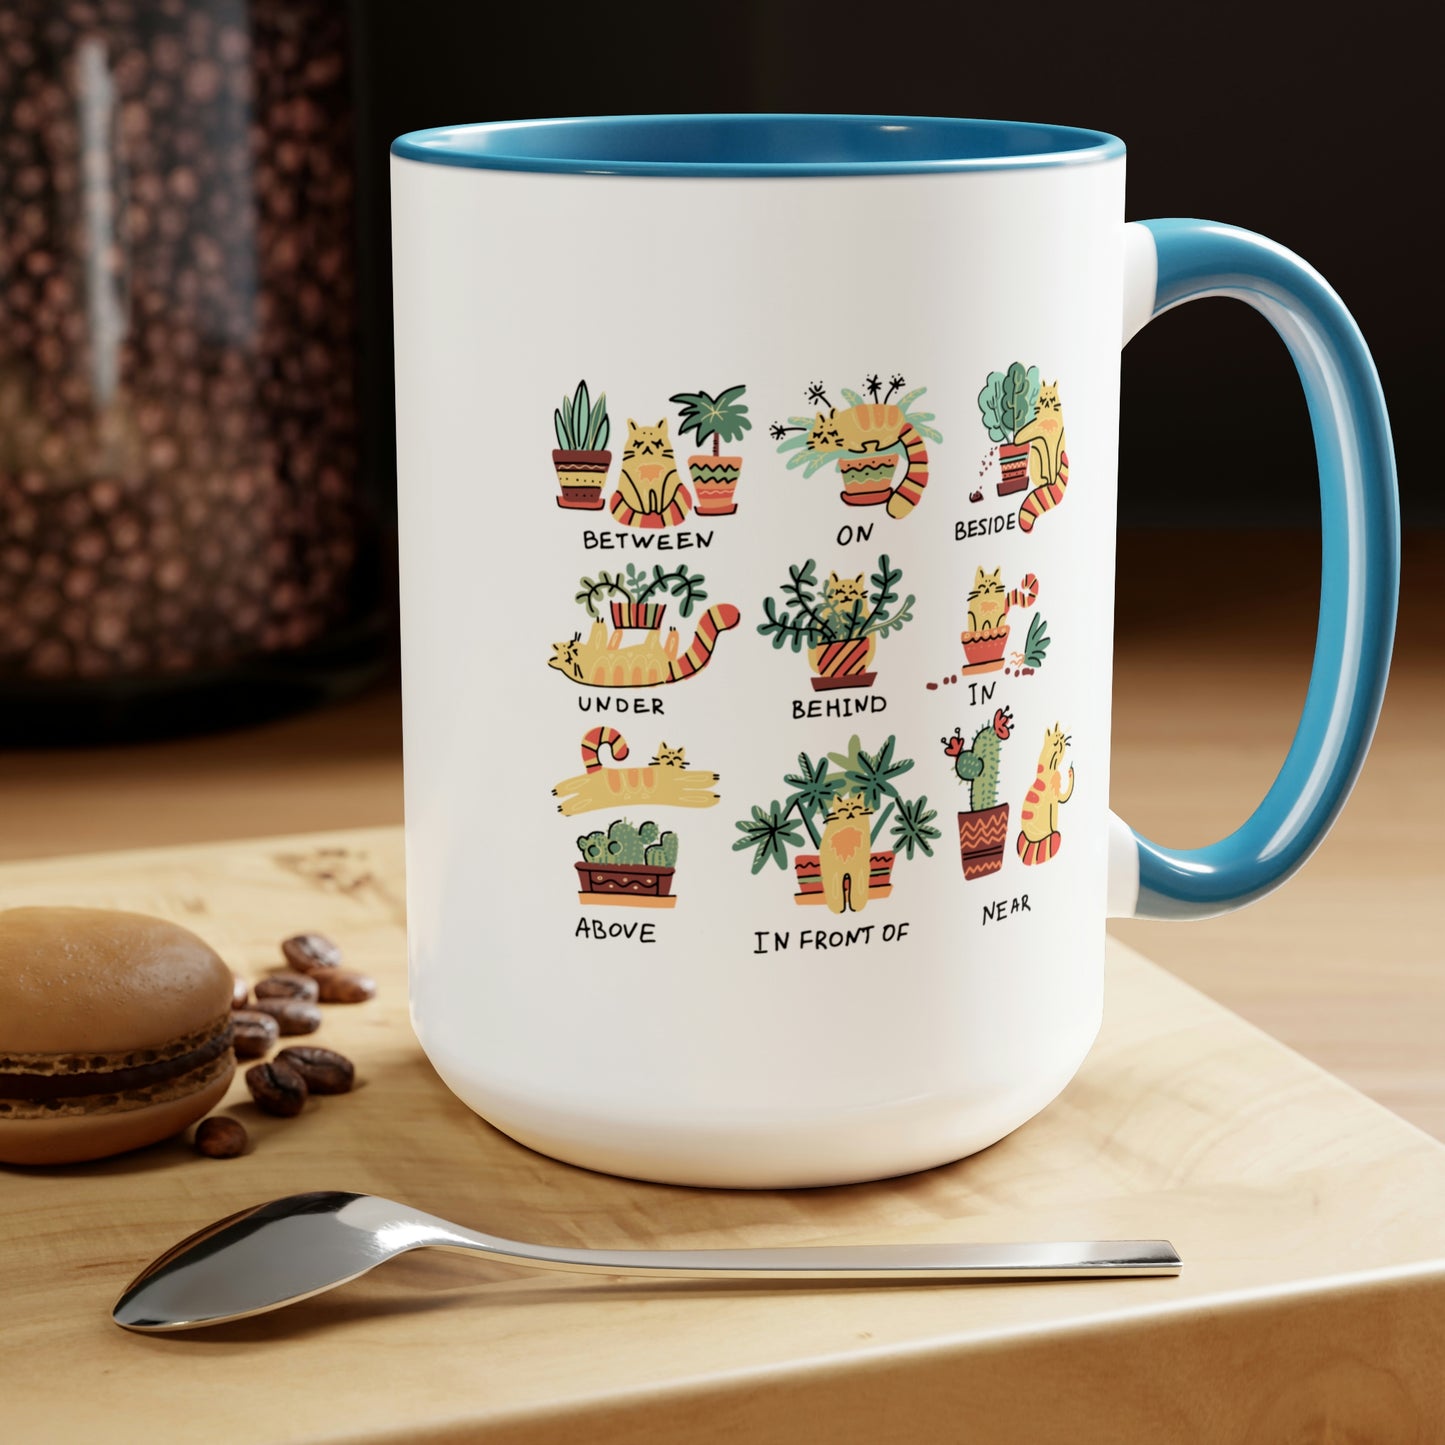 Funny cat Coffee Mugs, 15oz for cat lovers. Cats, plants and coffee. Plants and cats mug.